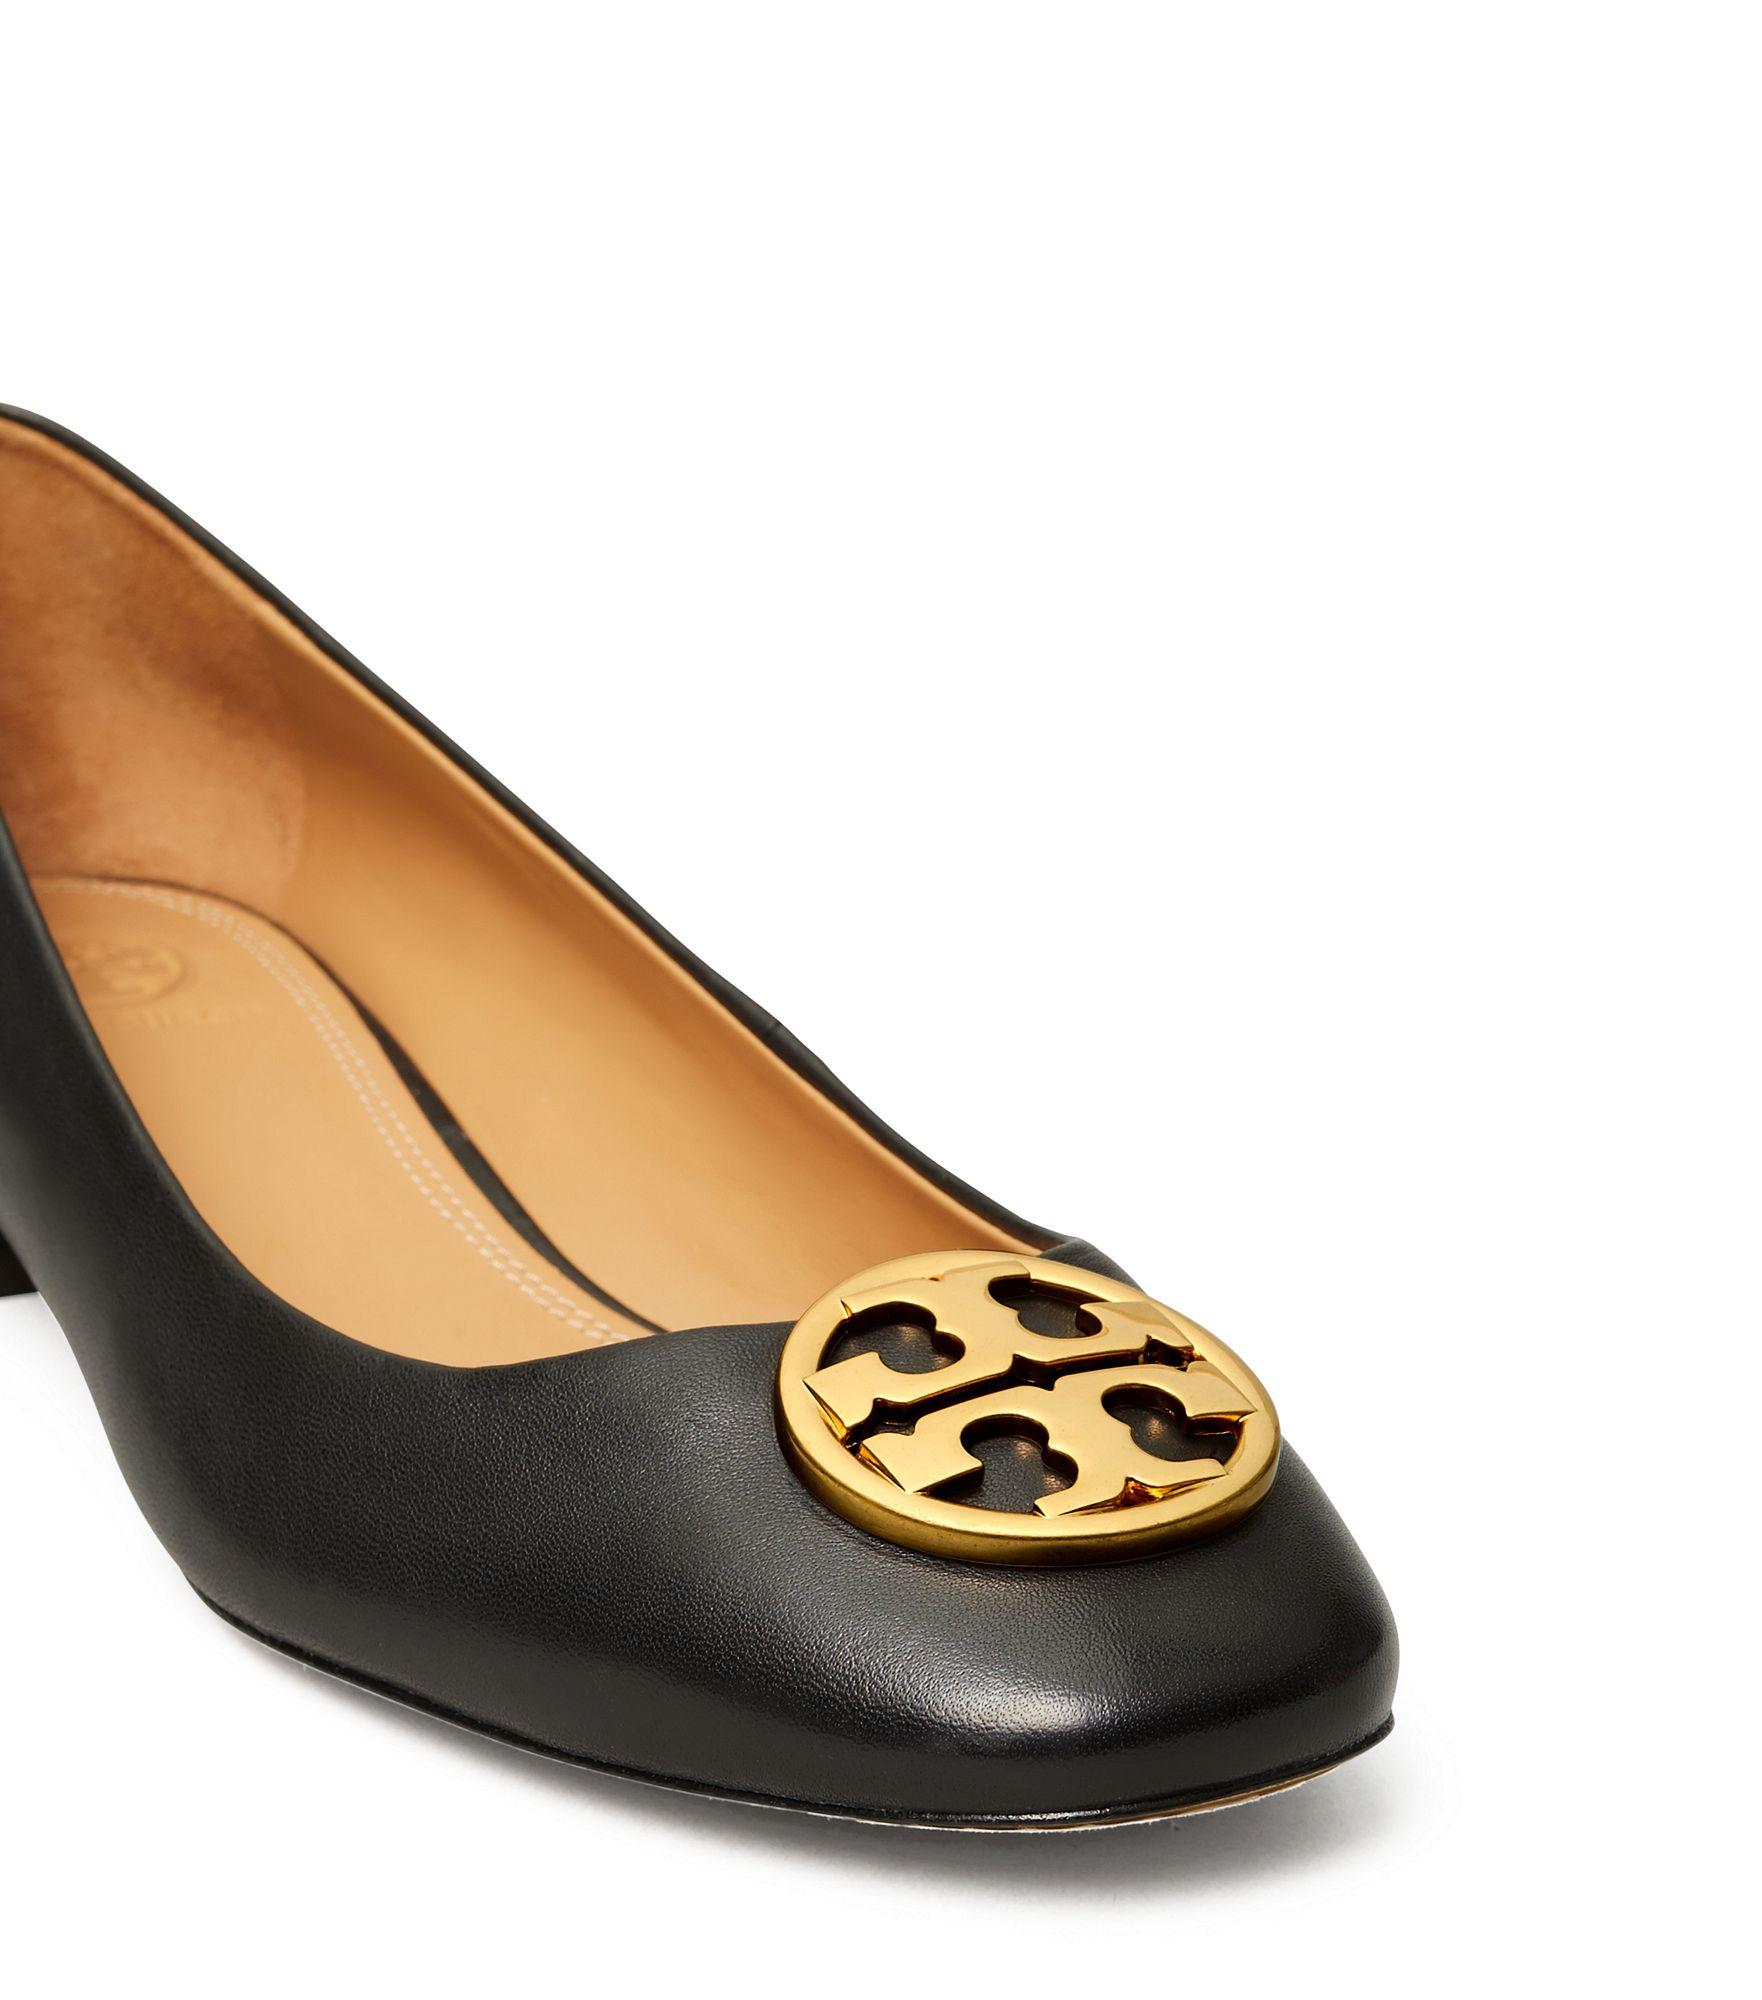 Tory Burch Leather Chelsea Heelsed Ballet Flats in Black - Lyst